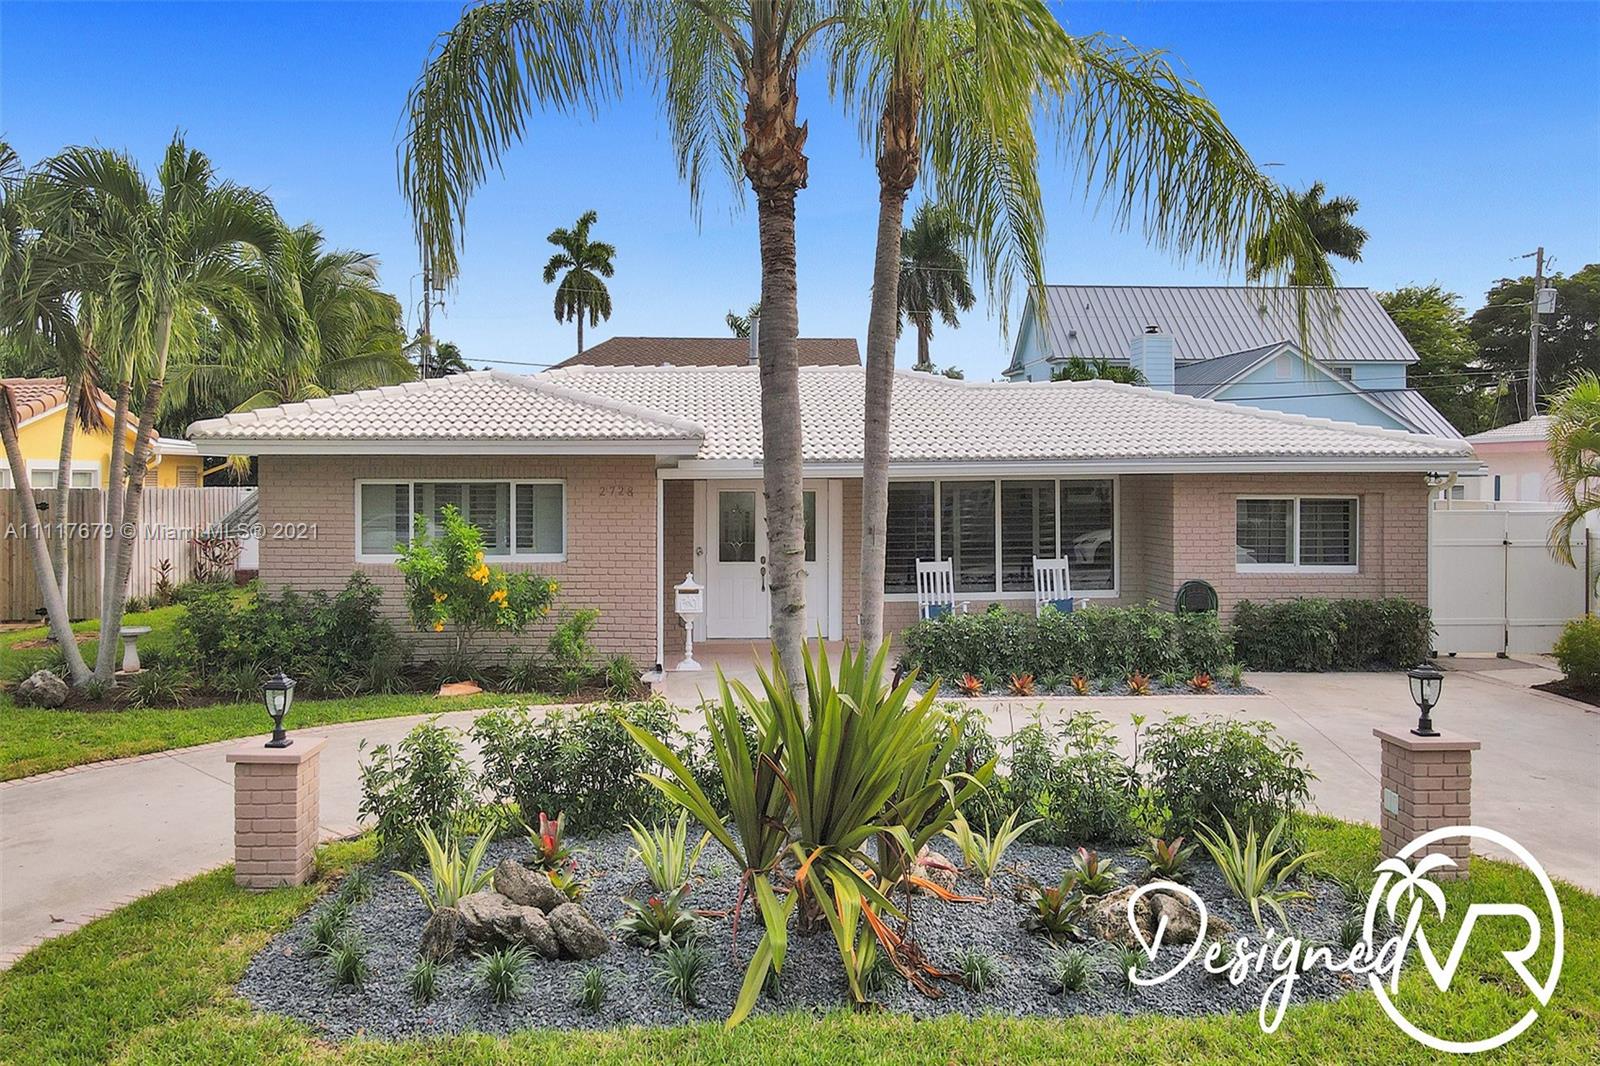 Beautiful and rarely available 2600+ sq ft under air, single-story, 6 bed 4 bath pool home in desirable Lake Placid section of Lighthouse Point. Available for month to month ONLY and come FULLY furnished.